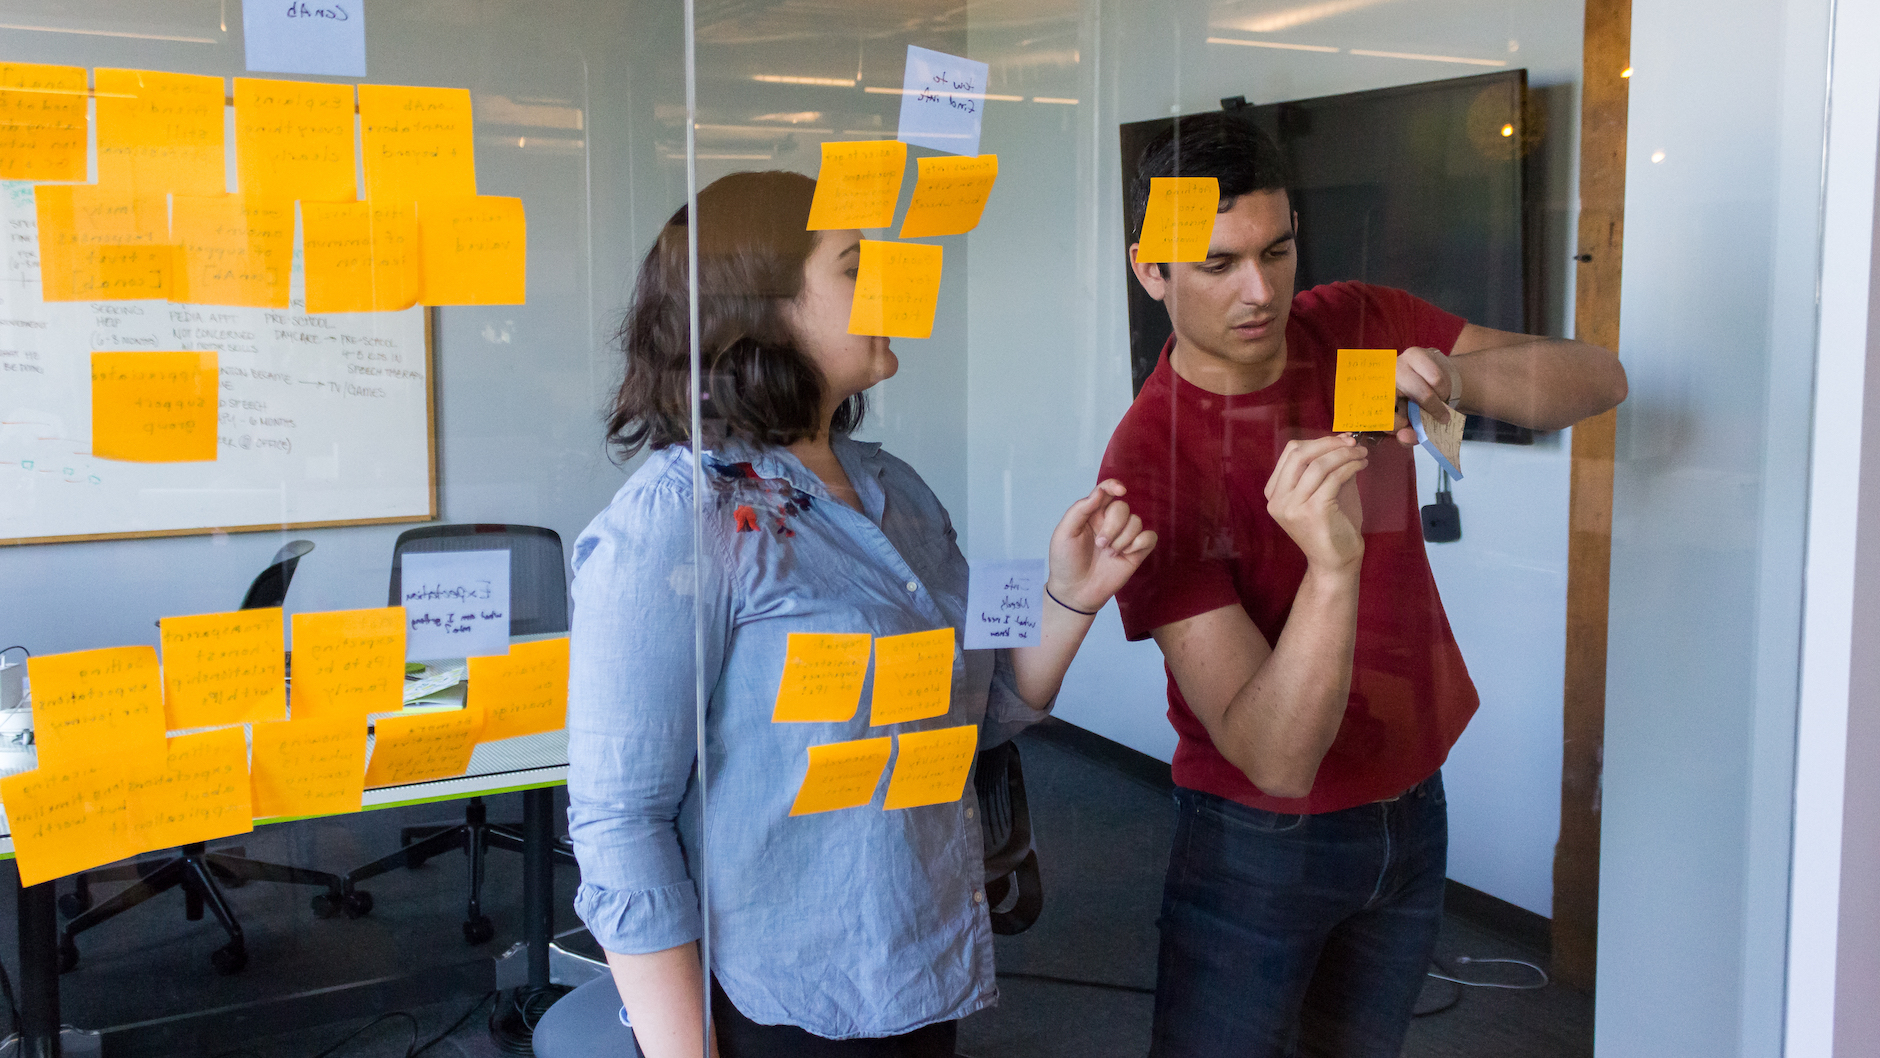 Two Fuzzy Math UX researchers are conducting synthesis of user experience testing research, working at a glass wall with sticky notes on it. One person is talking and gesturing while the other is writing on a sticky note on the glass wall